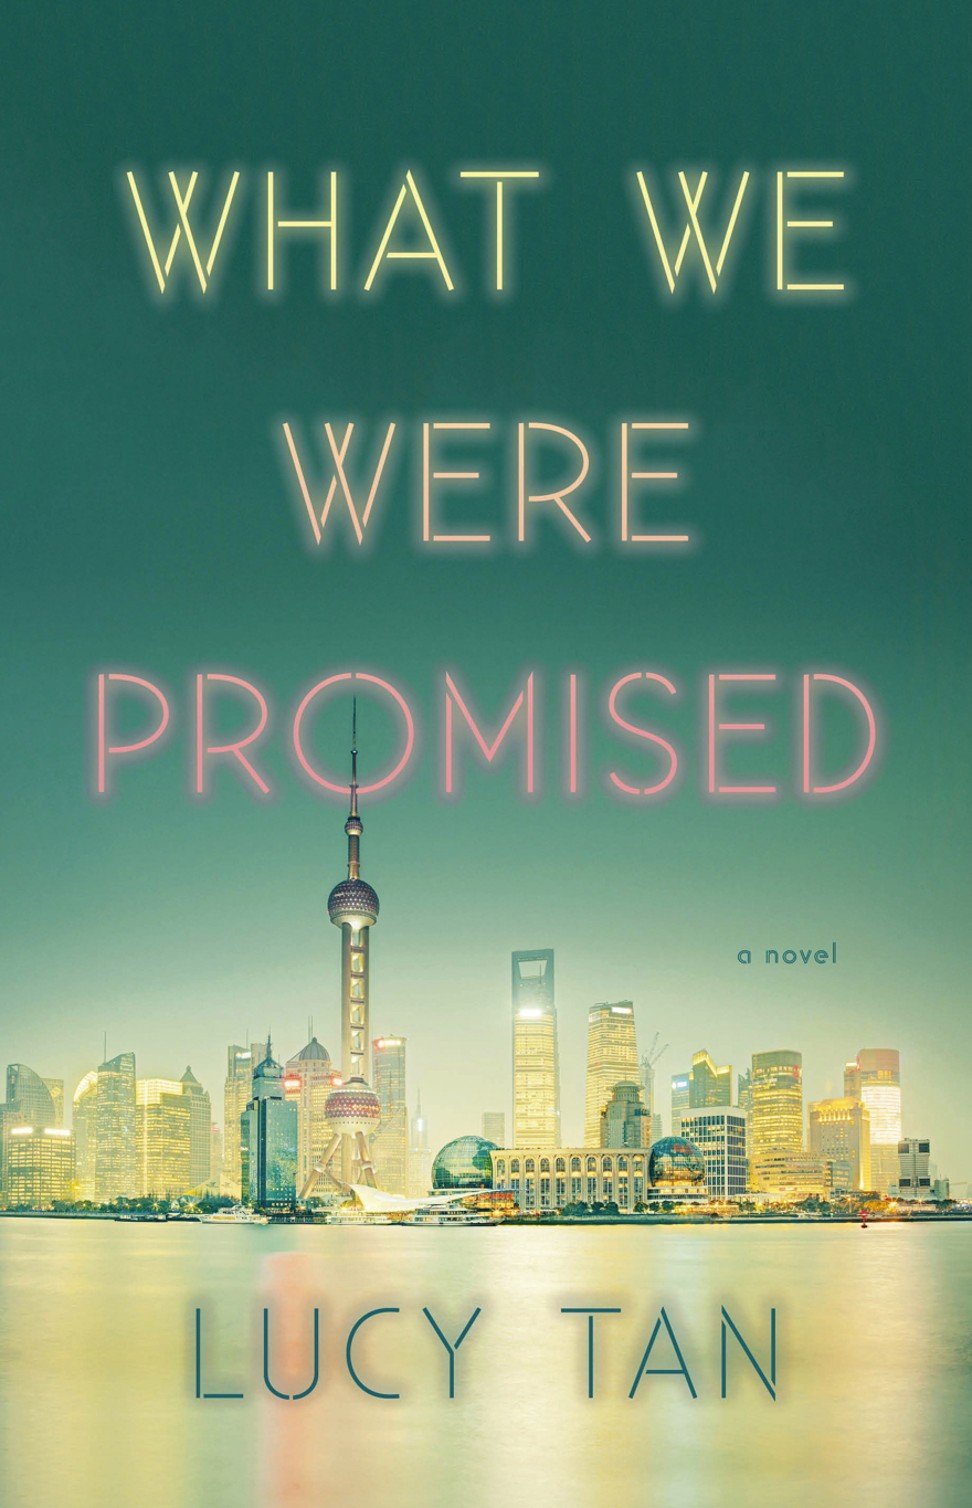 The cover of Lucy Tan’s debut novel.